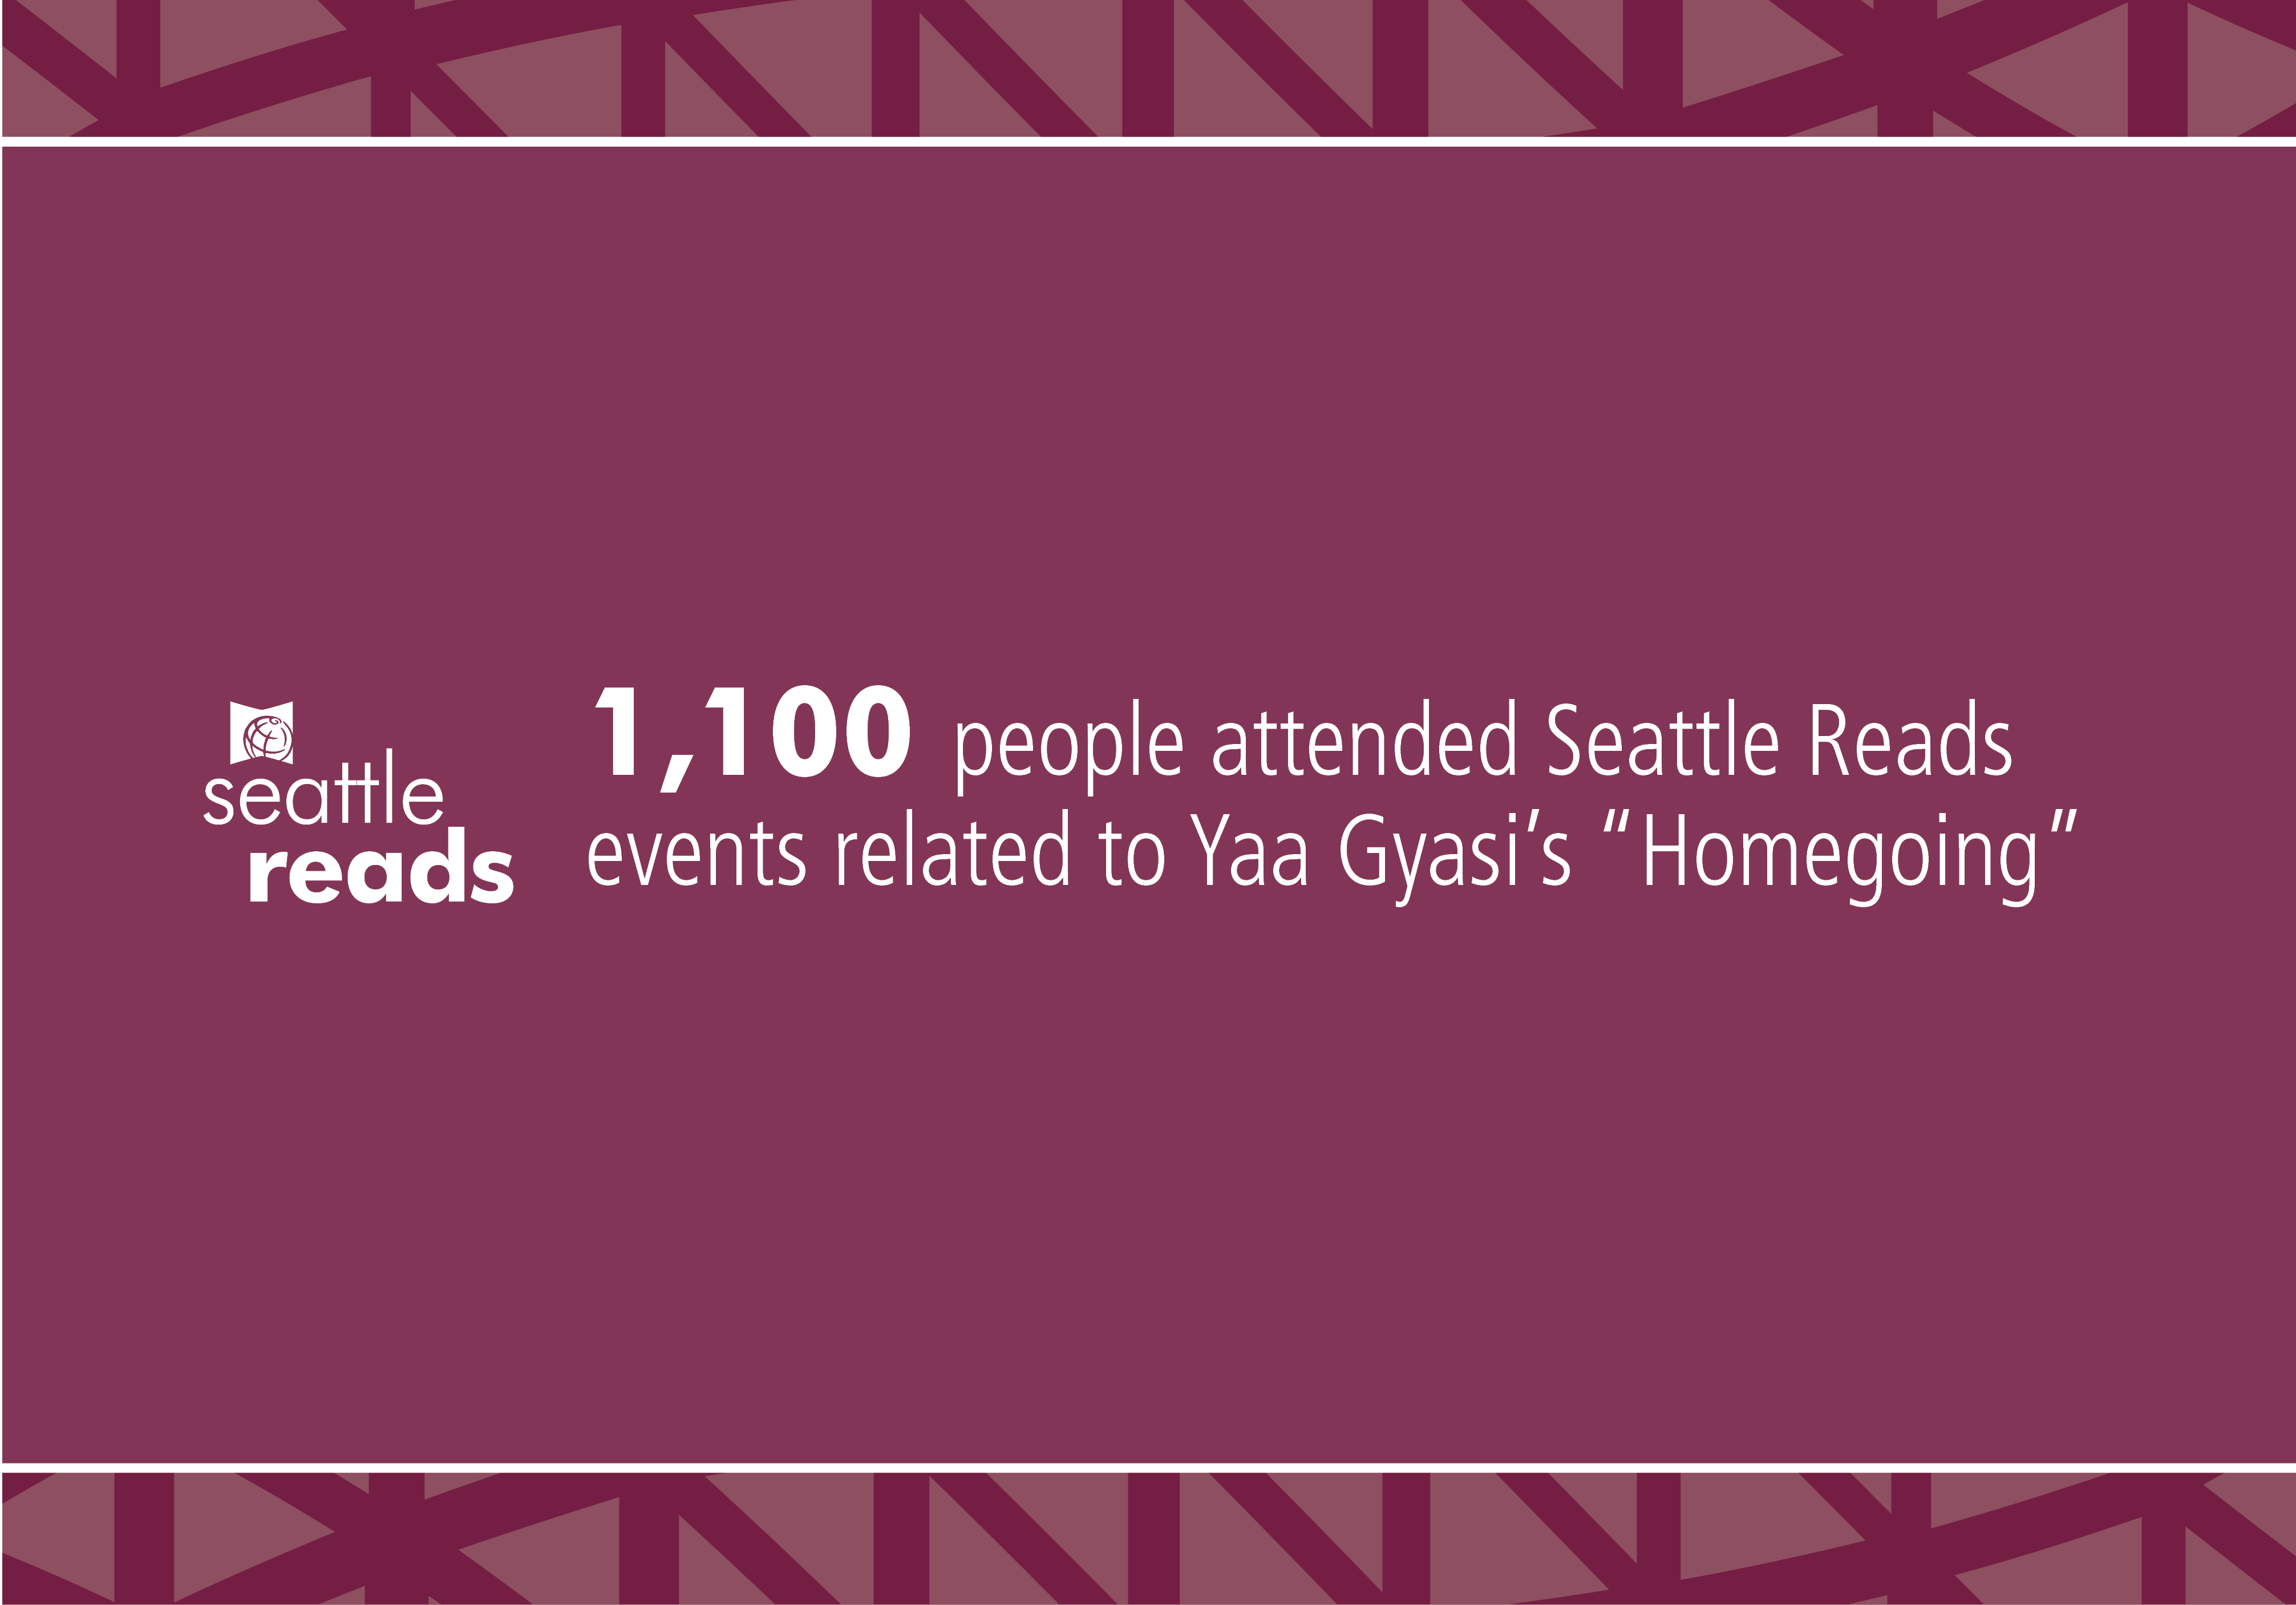 Over 1,100 people attended Seattle Reads events related to Yaa Gyasi's "Homegoing"